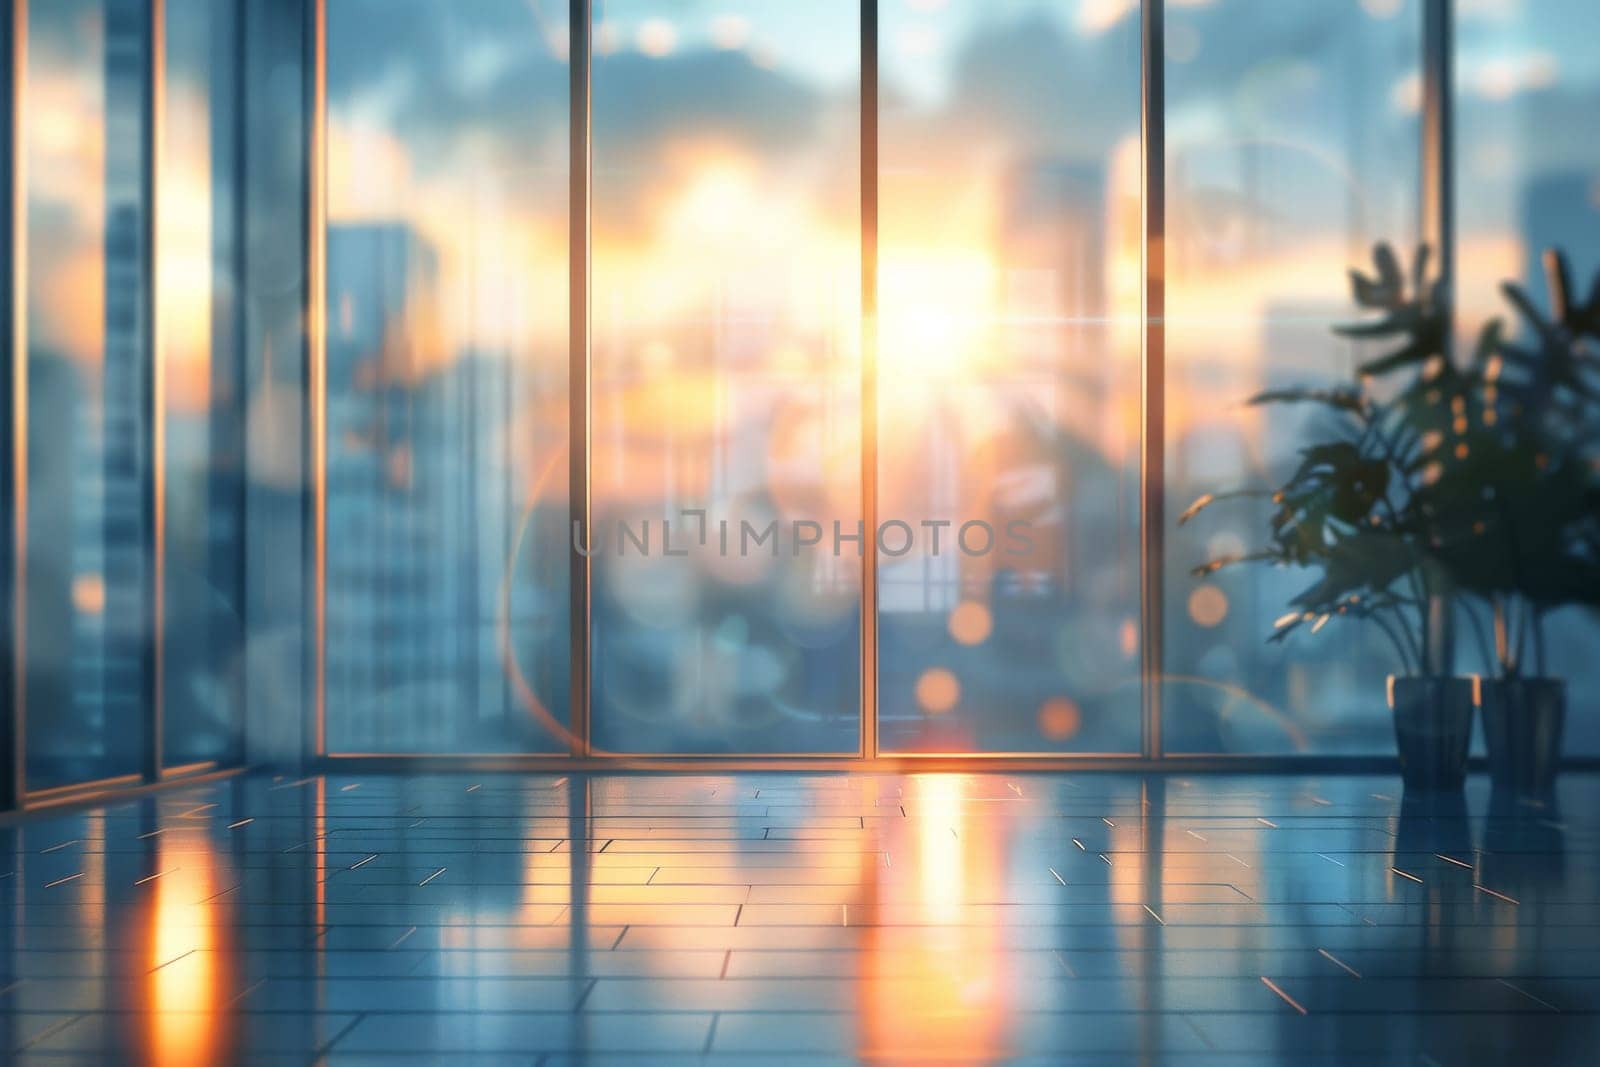 A window with a view of a city skyline and a plant in a vase. The sunlight is shining through the window, creating a warm and inviting atmosphere